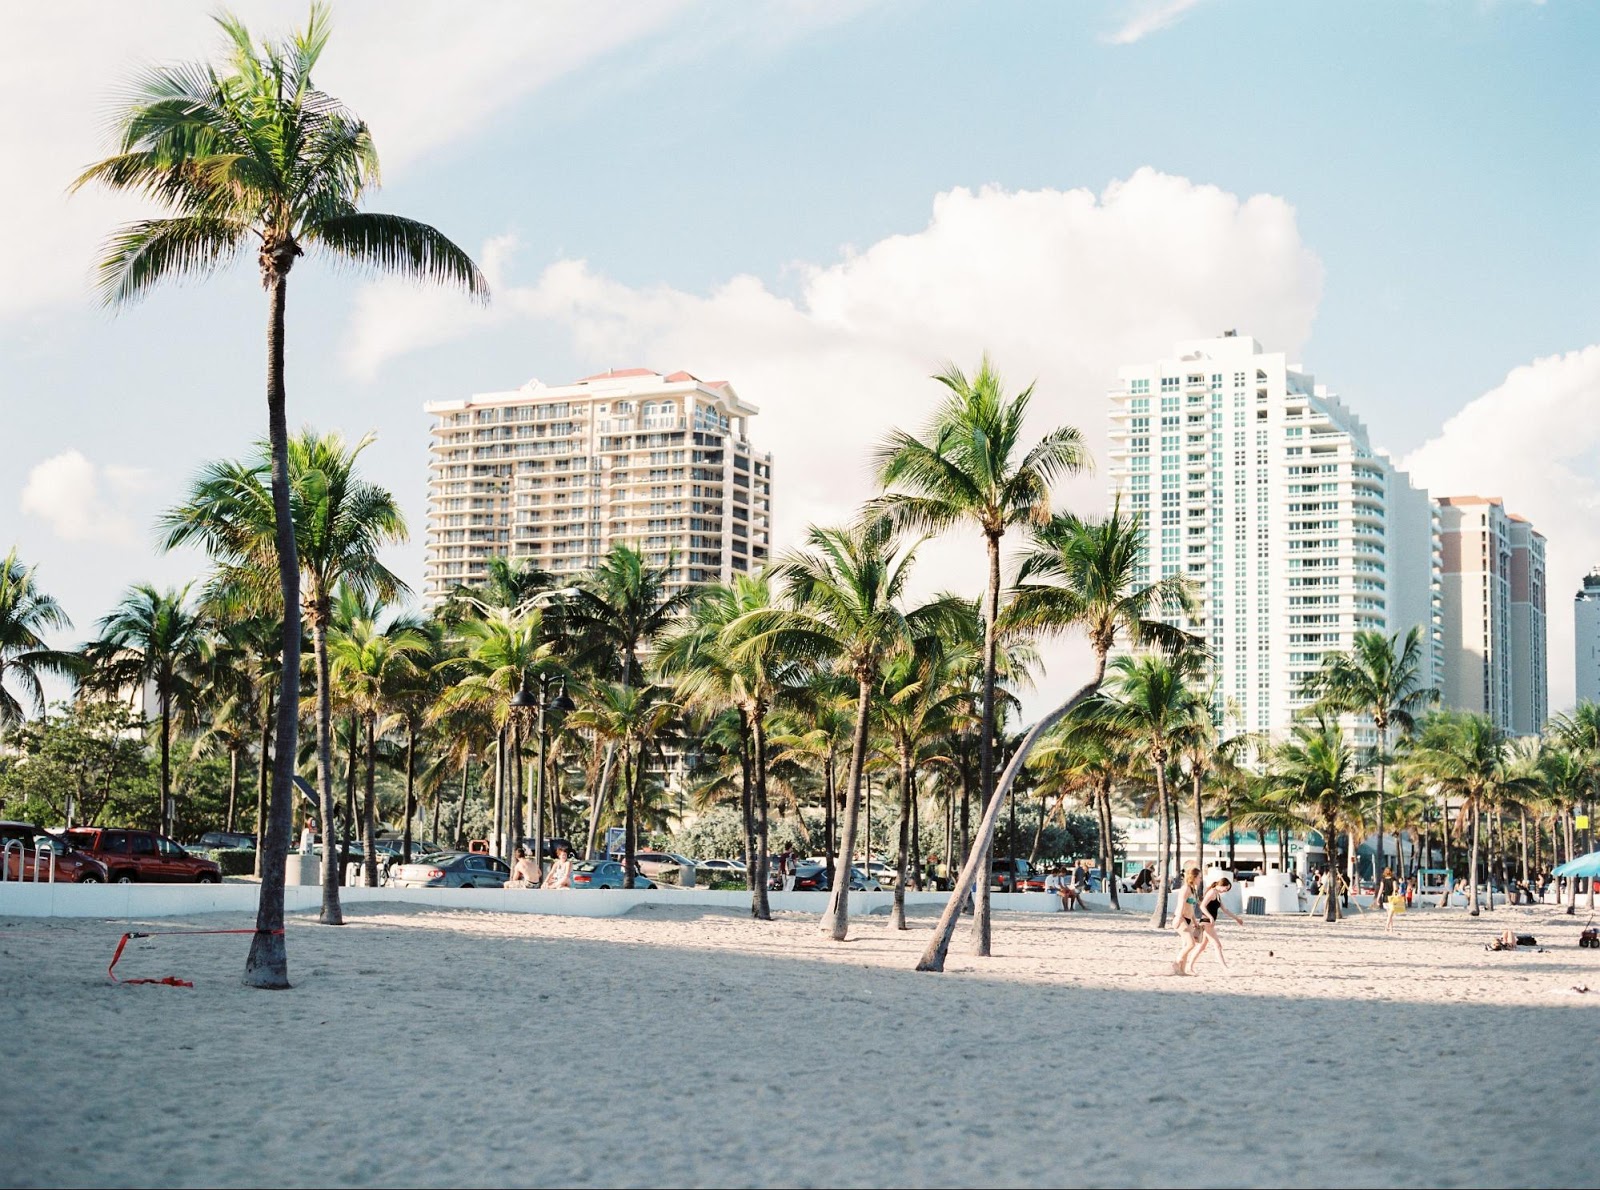 Should You Buy or Rent an Apartment in Miami?